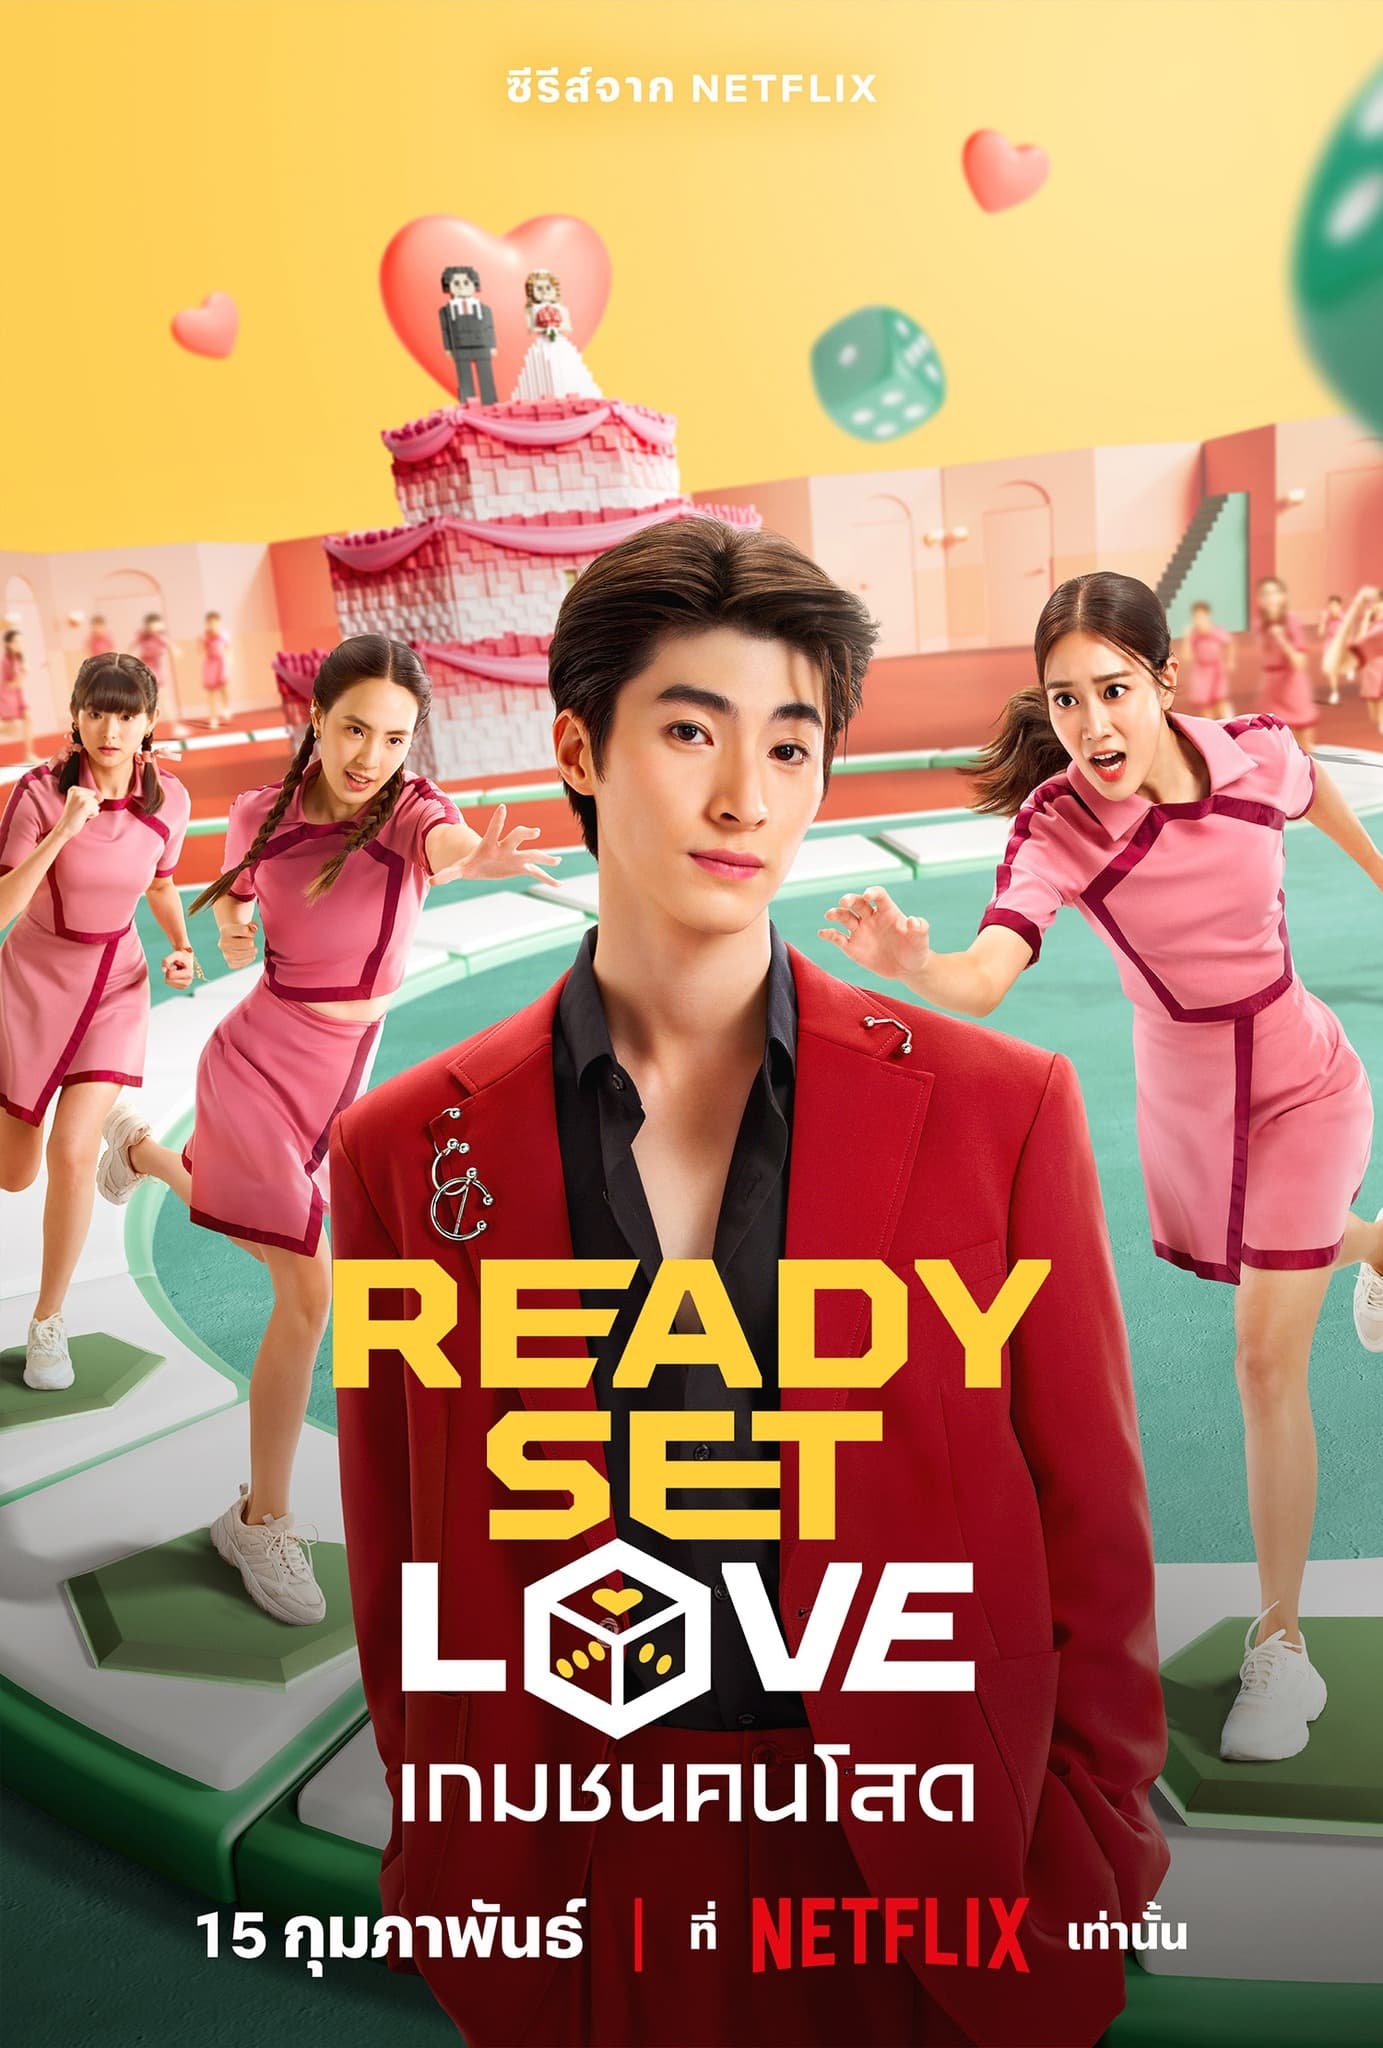 TV ratings for Ready, Set, Love (เกมชนคนโสด) in Philippines. Netflix TV series